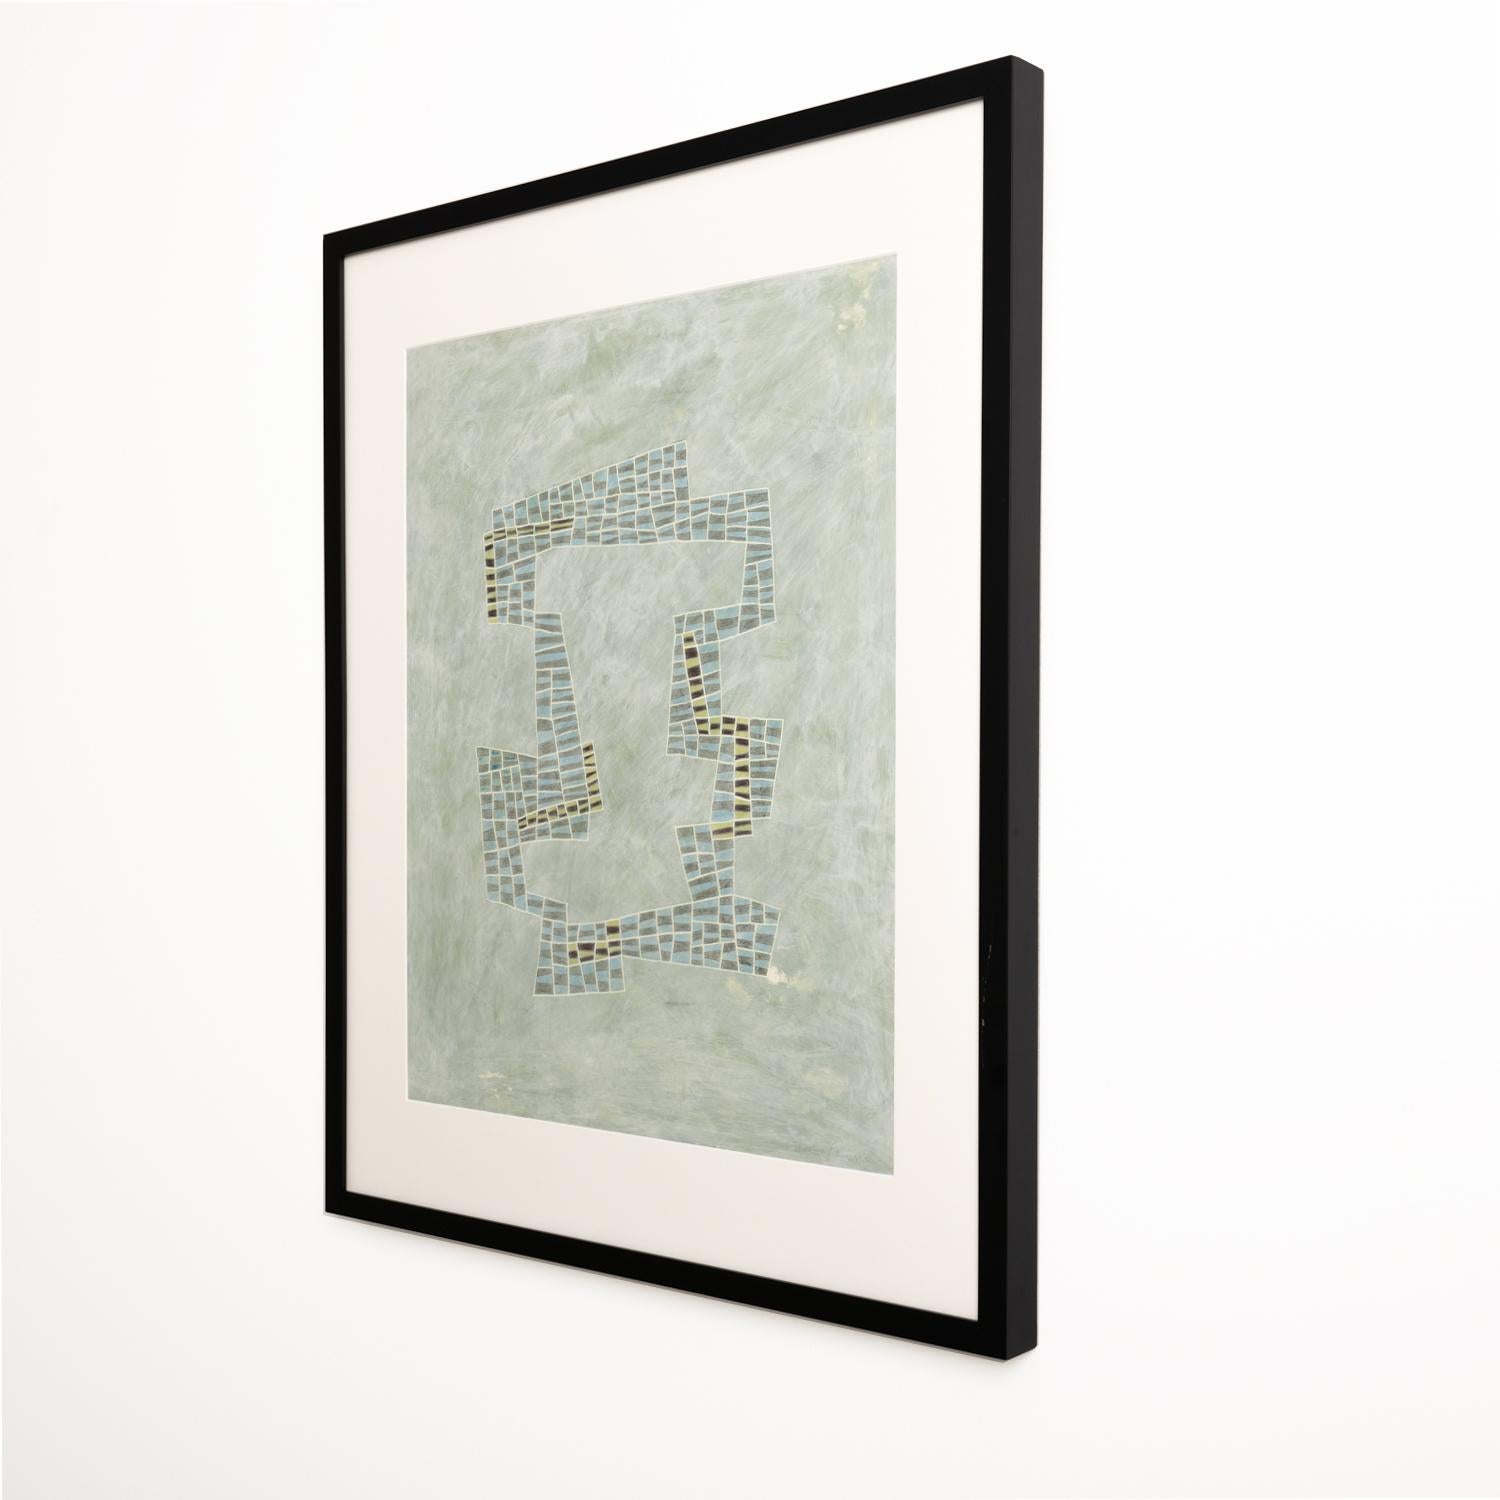 Abstract geometric painting with a cool toned palette of green, blue, and grey with accents of black and white against a sea foam green colored acrylic wash background
